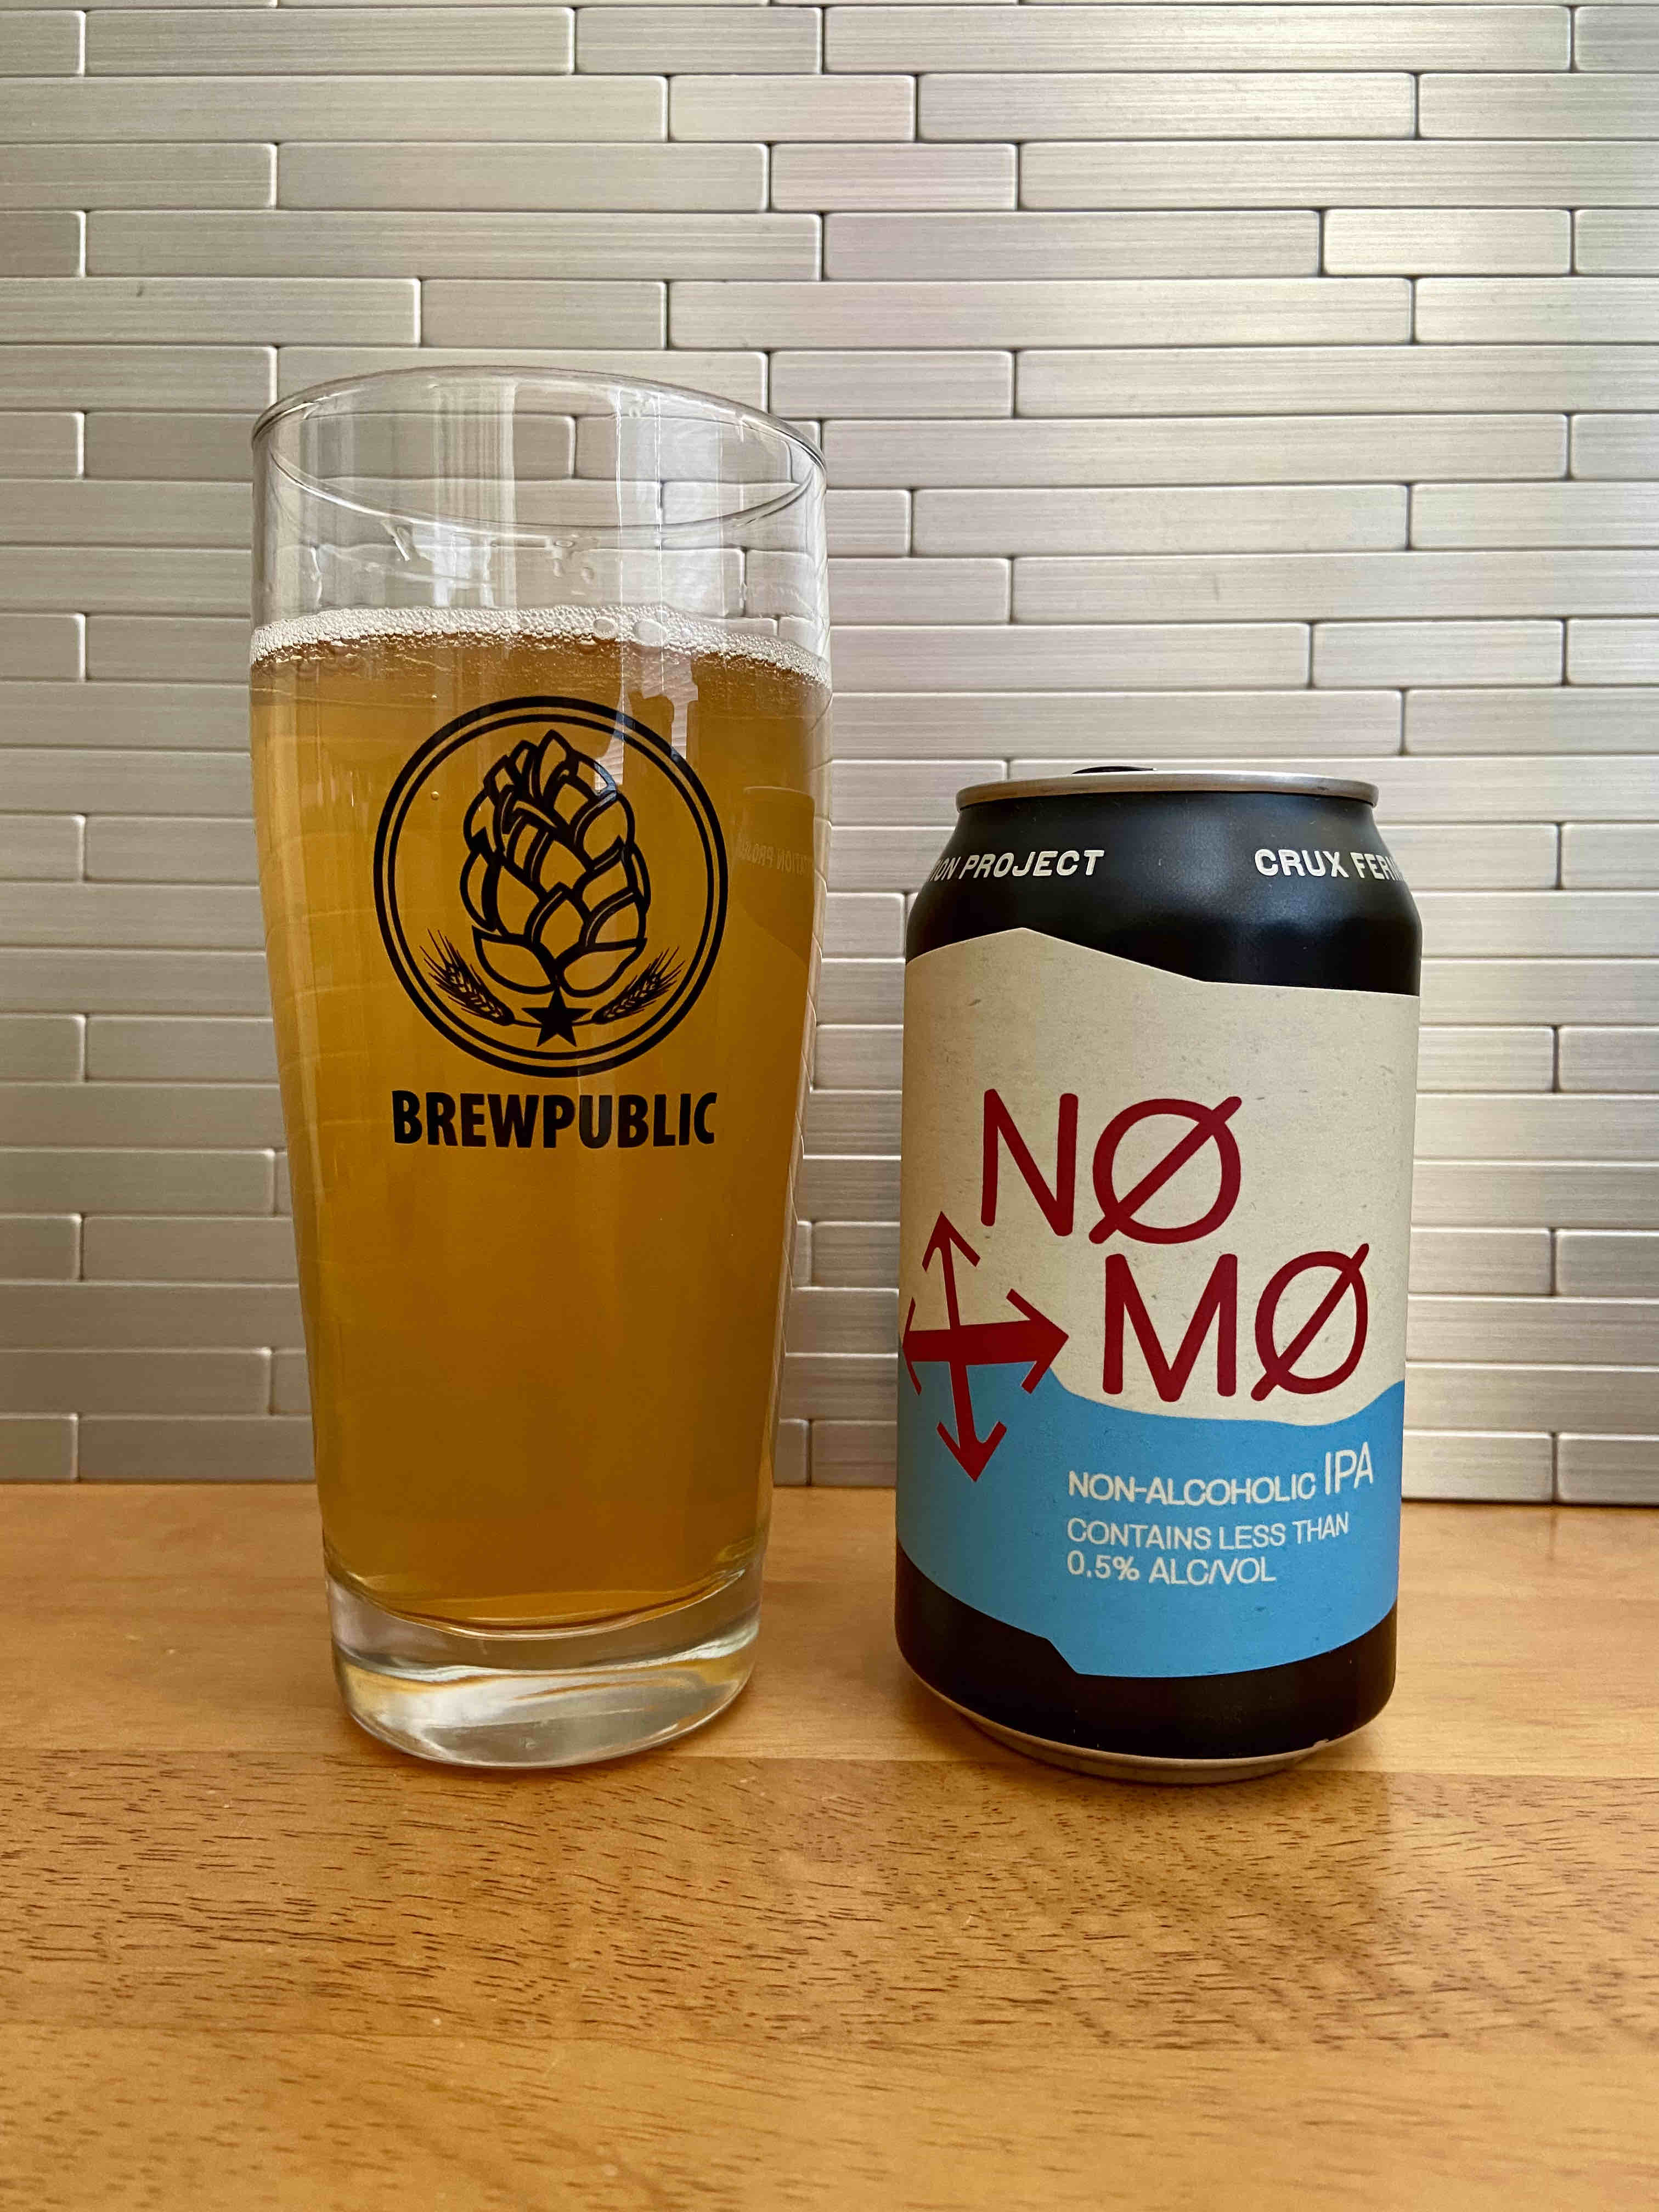 A pour of the new NØ MØ Non-Alcoholic IPA from Crux Fermentation Project